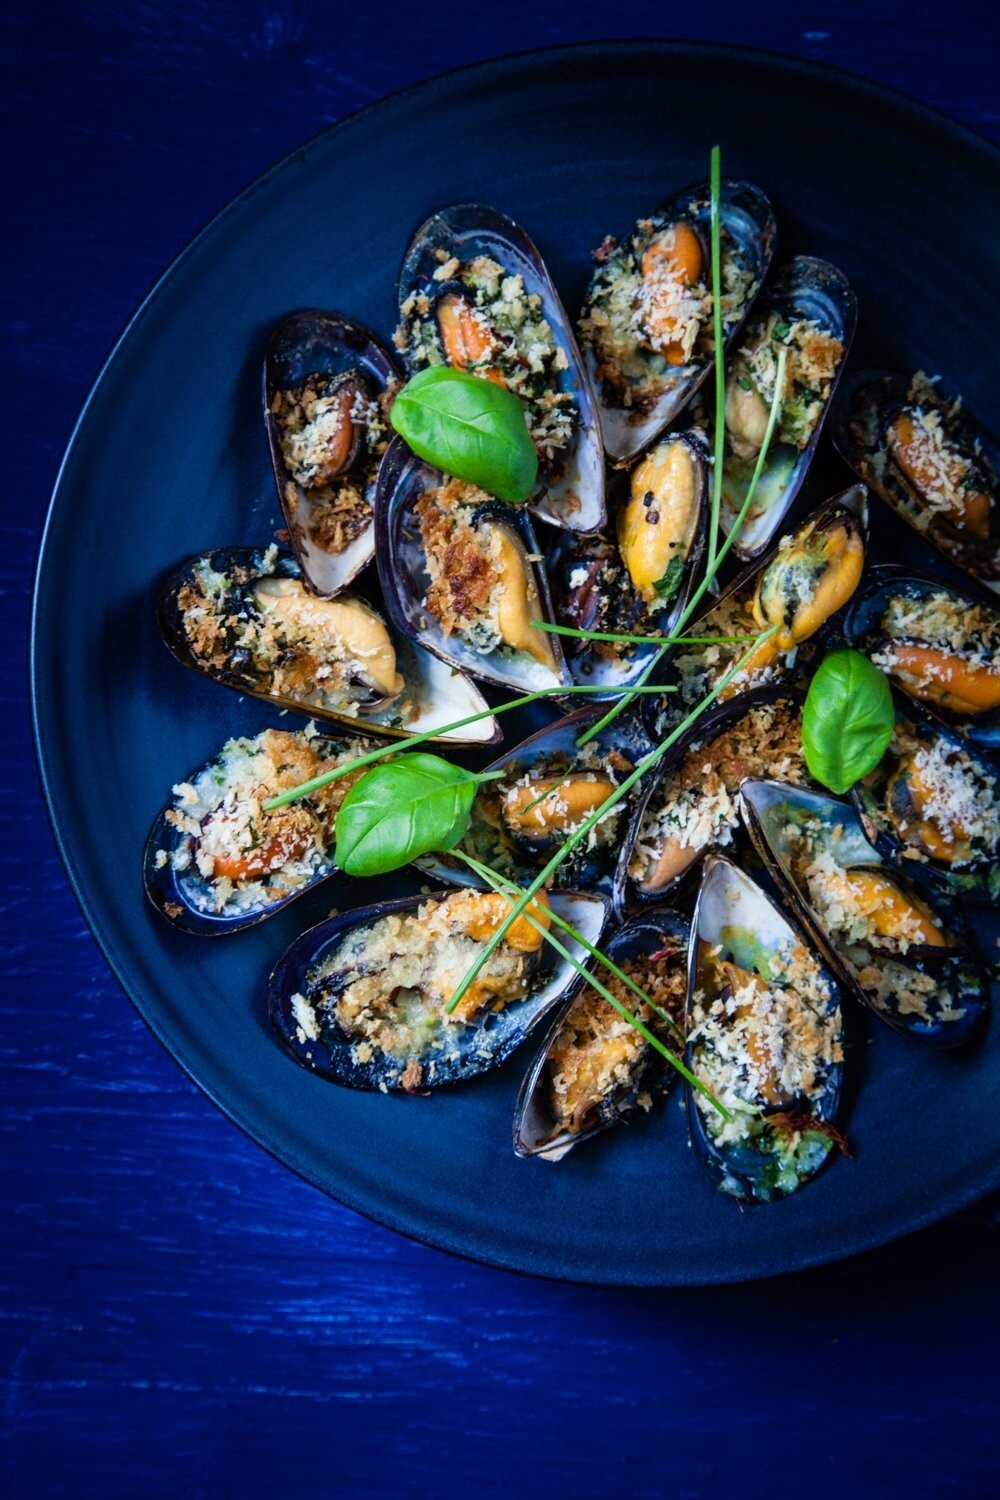 This is one of my favorite shots in my whole portfolio. I love the vivid blue and green colours, and the texture of the mussels in their shells. Mussels Gratinee is a bit of a different dish than the typical shellfish in a white wine broth. They are topped with bread crumbs and herbs and drizzled with a bit of oil before baking in the oven. They’re a perfect, easy starter for a dinner party or an hors d'oeuvre with cocktails.